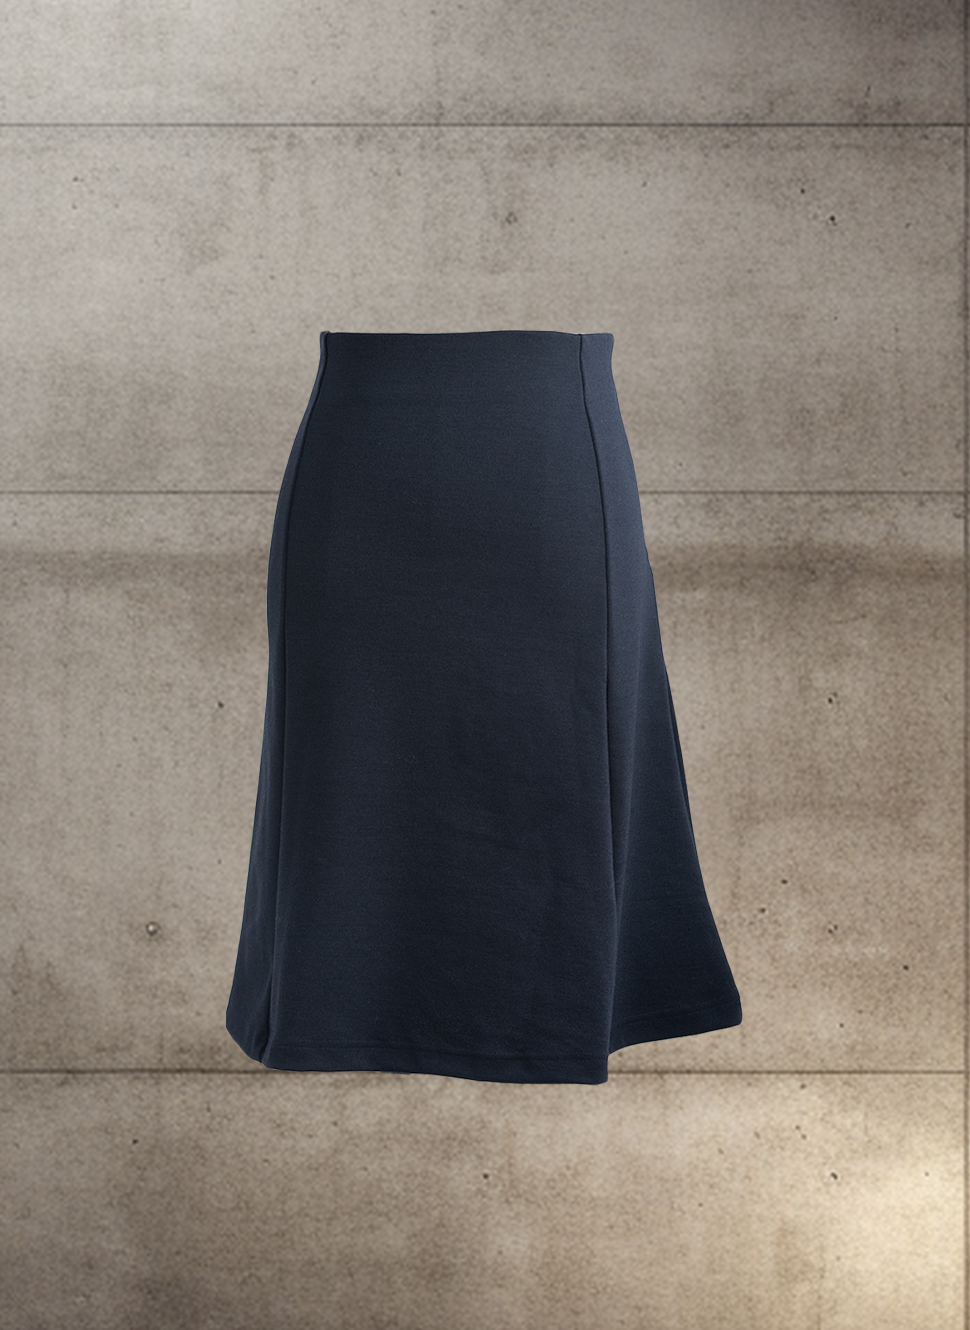 Canada made skirt in navy